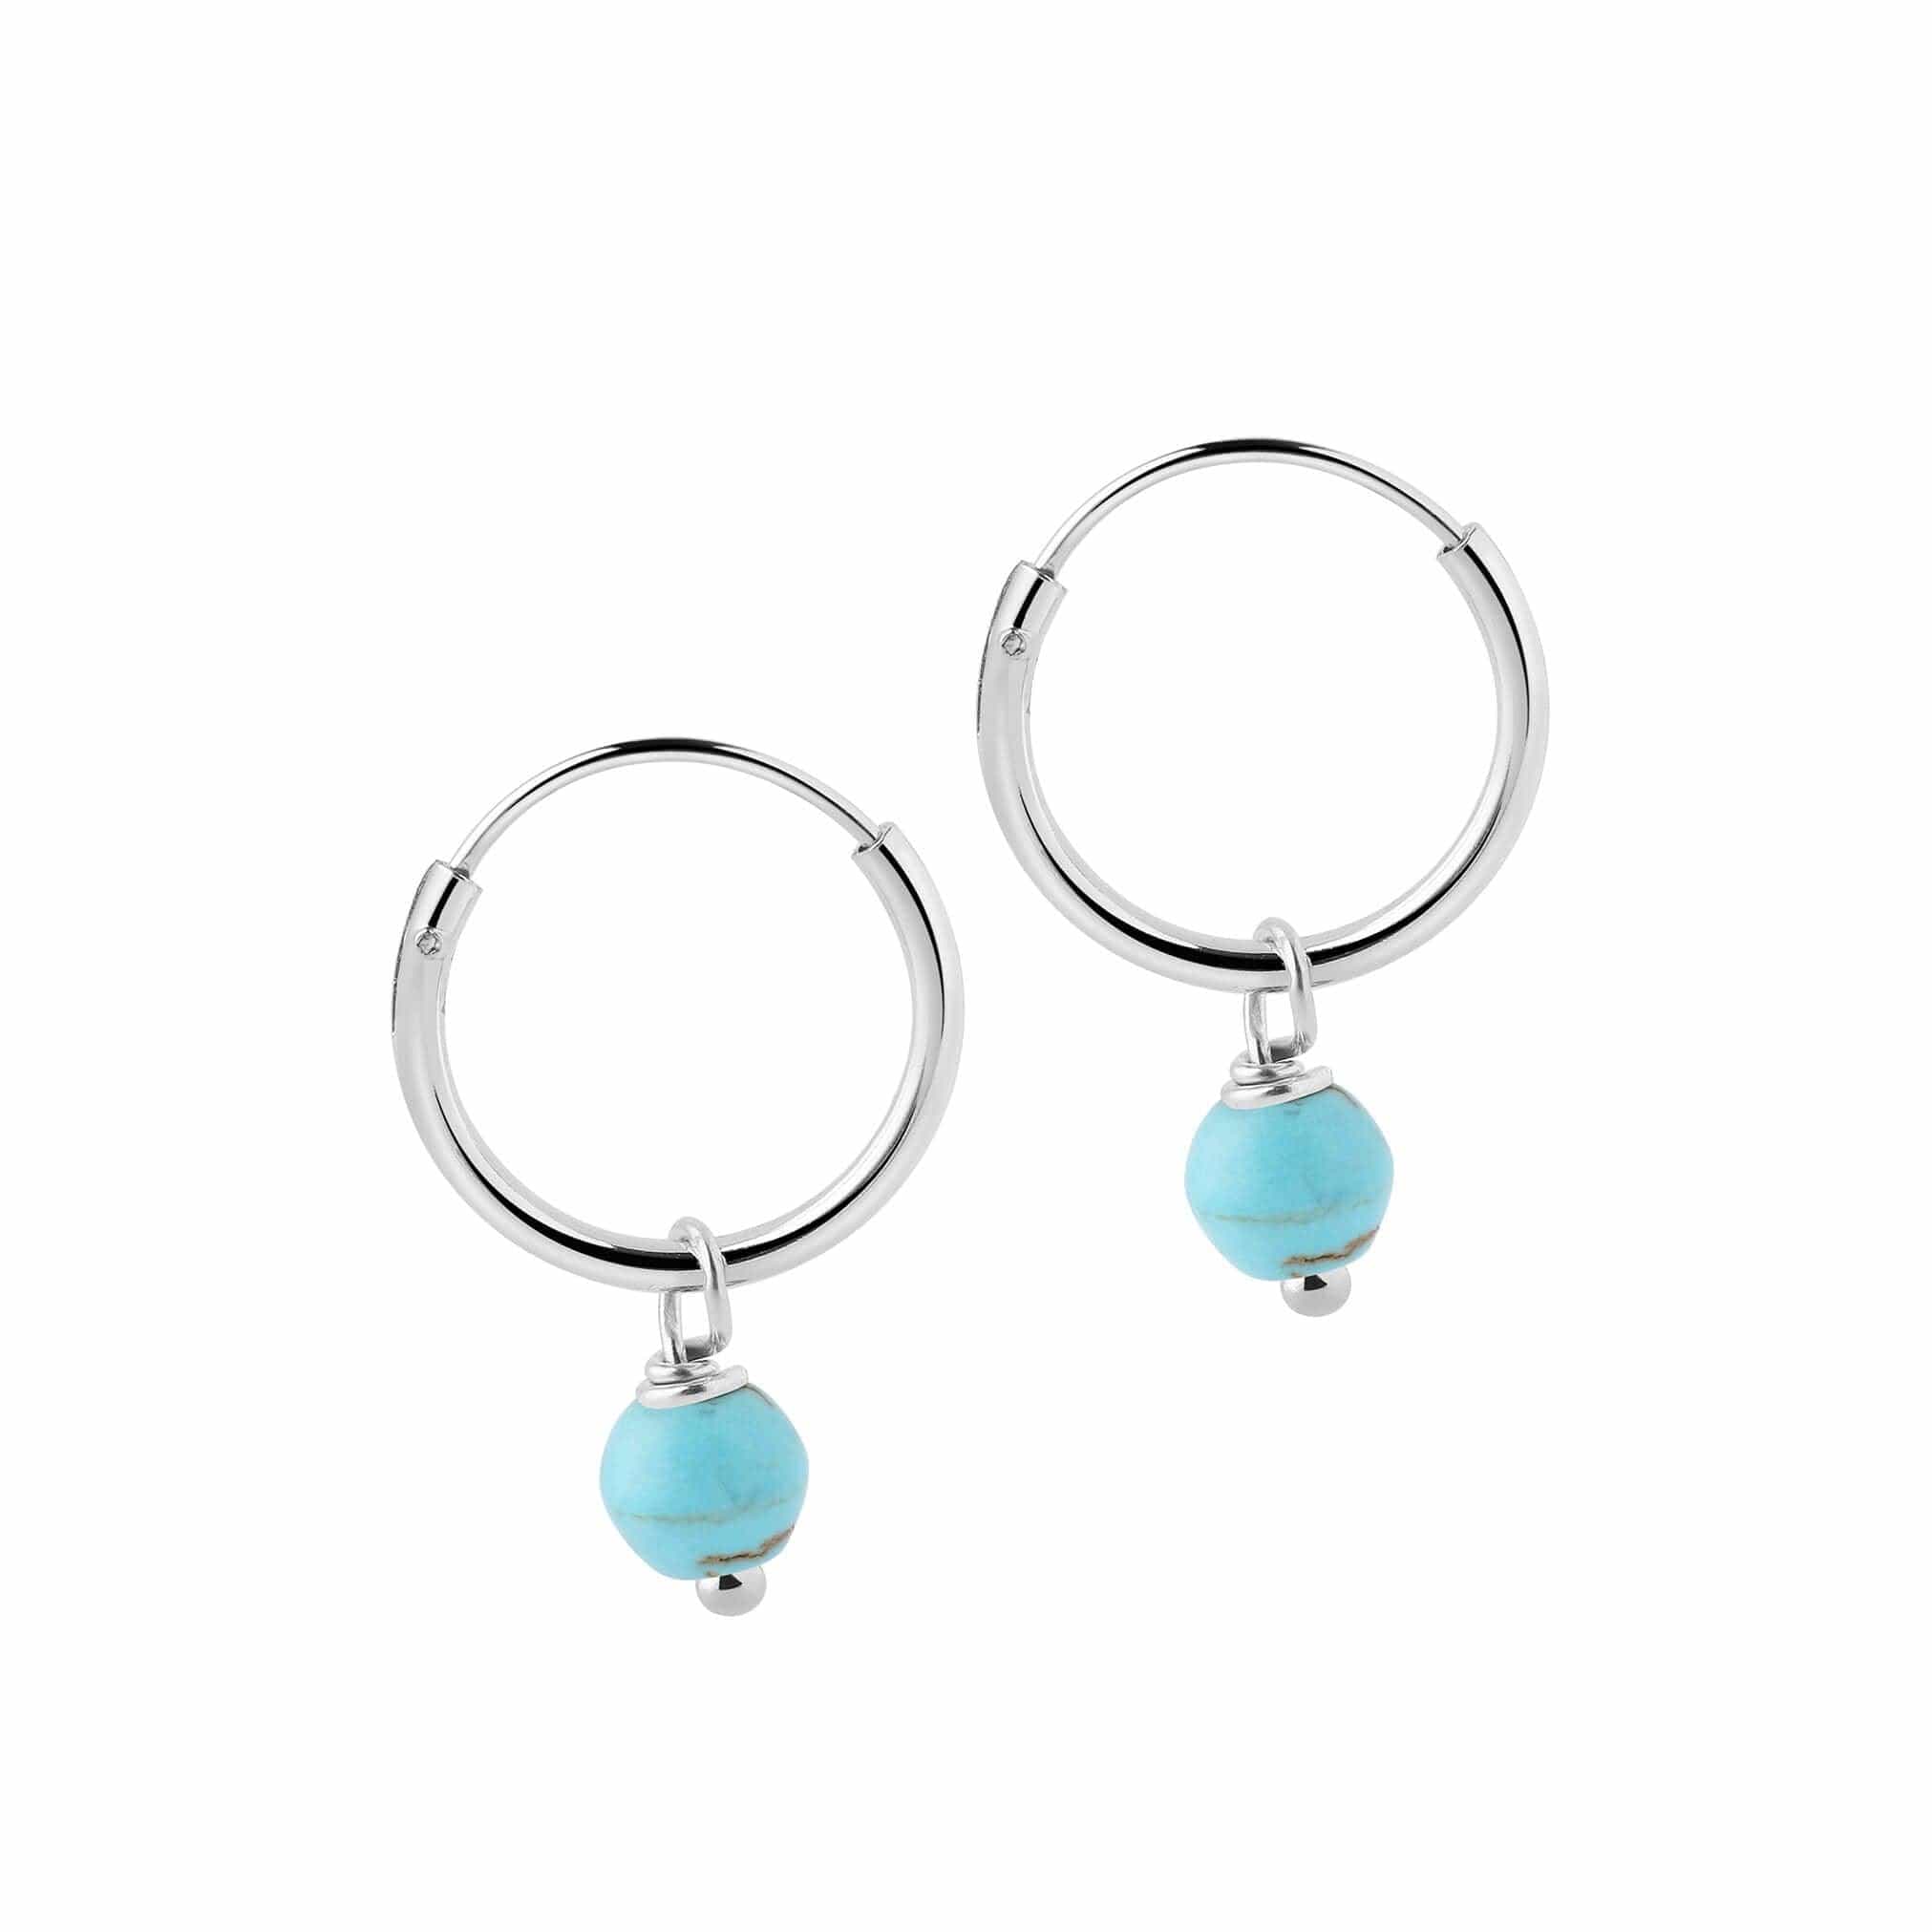 12mm silver Hoop Earrings with Turquoise Blue Stone